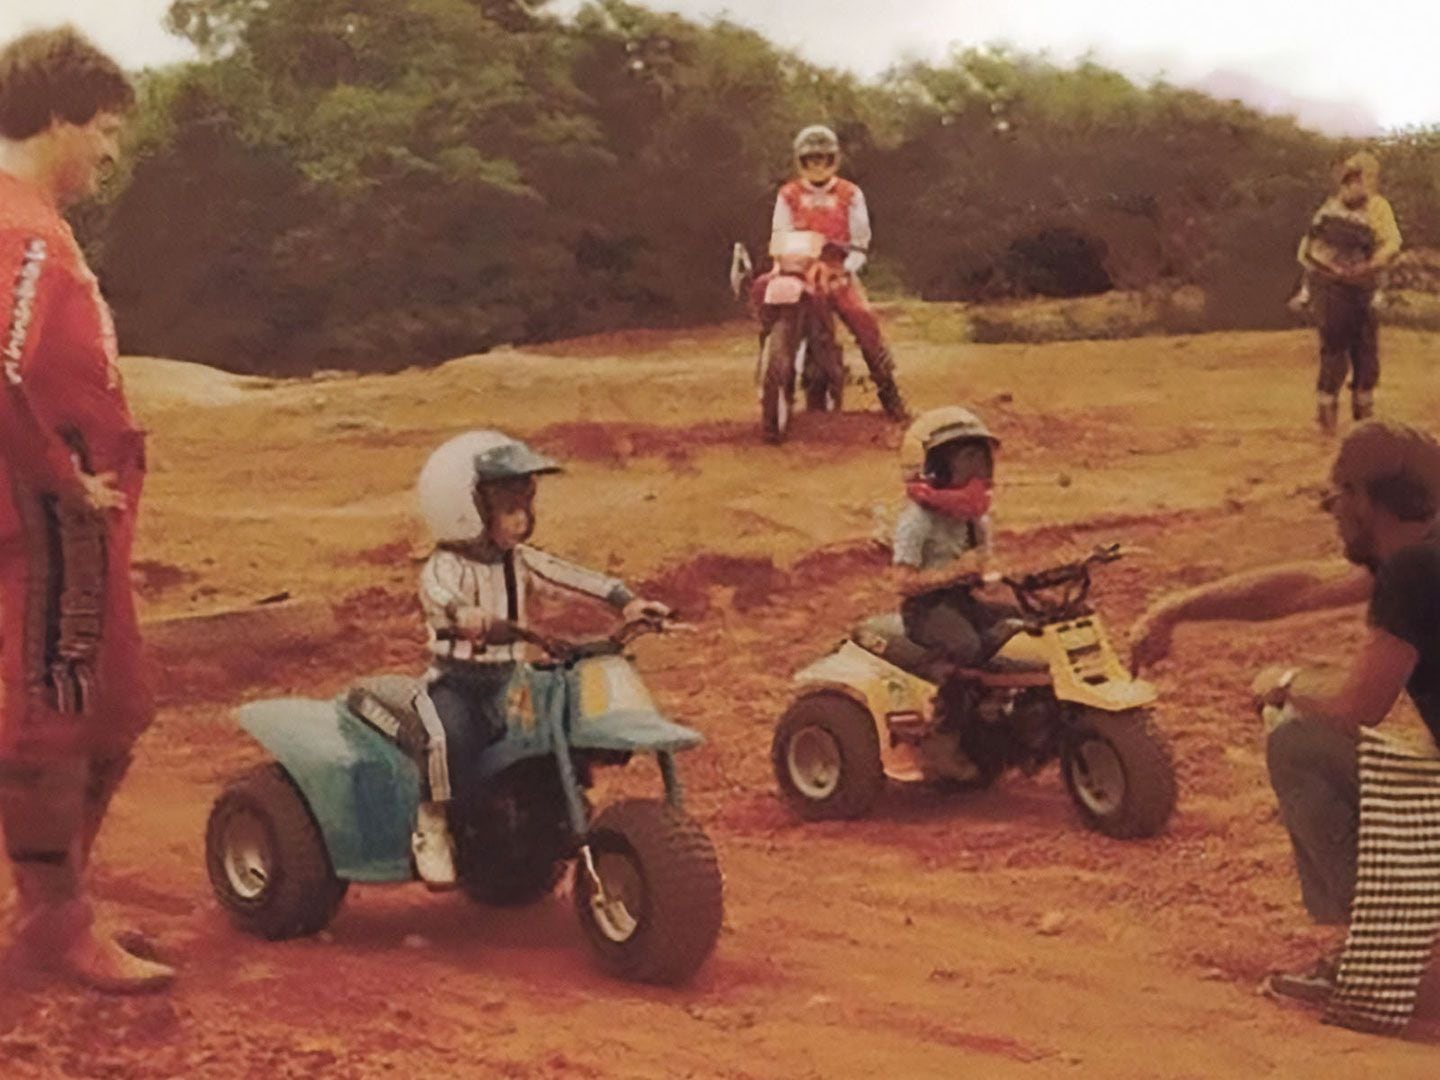 Eric Osner (left) with friends and a young Mariel tearing it up on the track in the 1970s on three-wheelers.